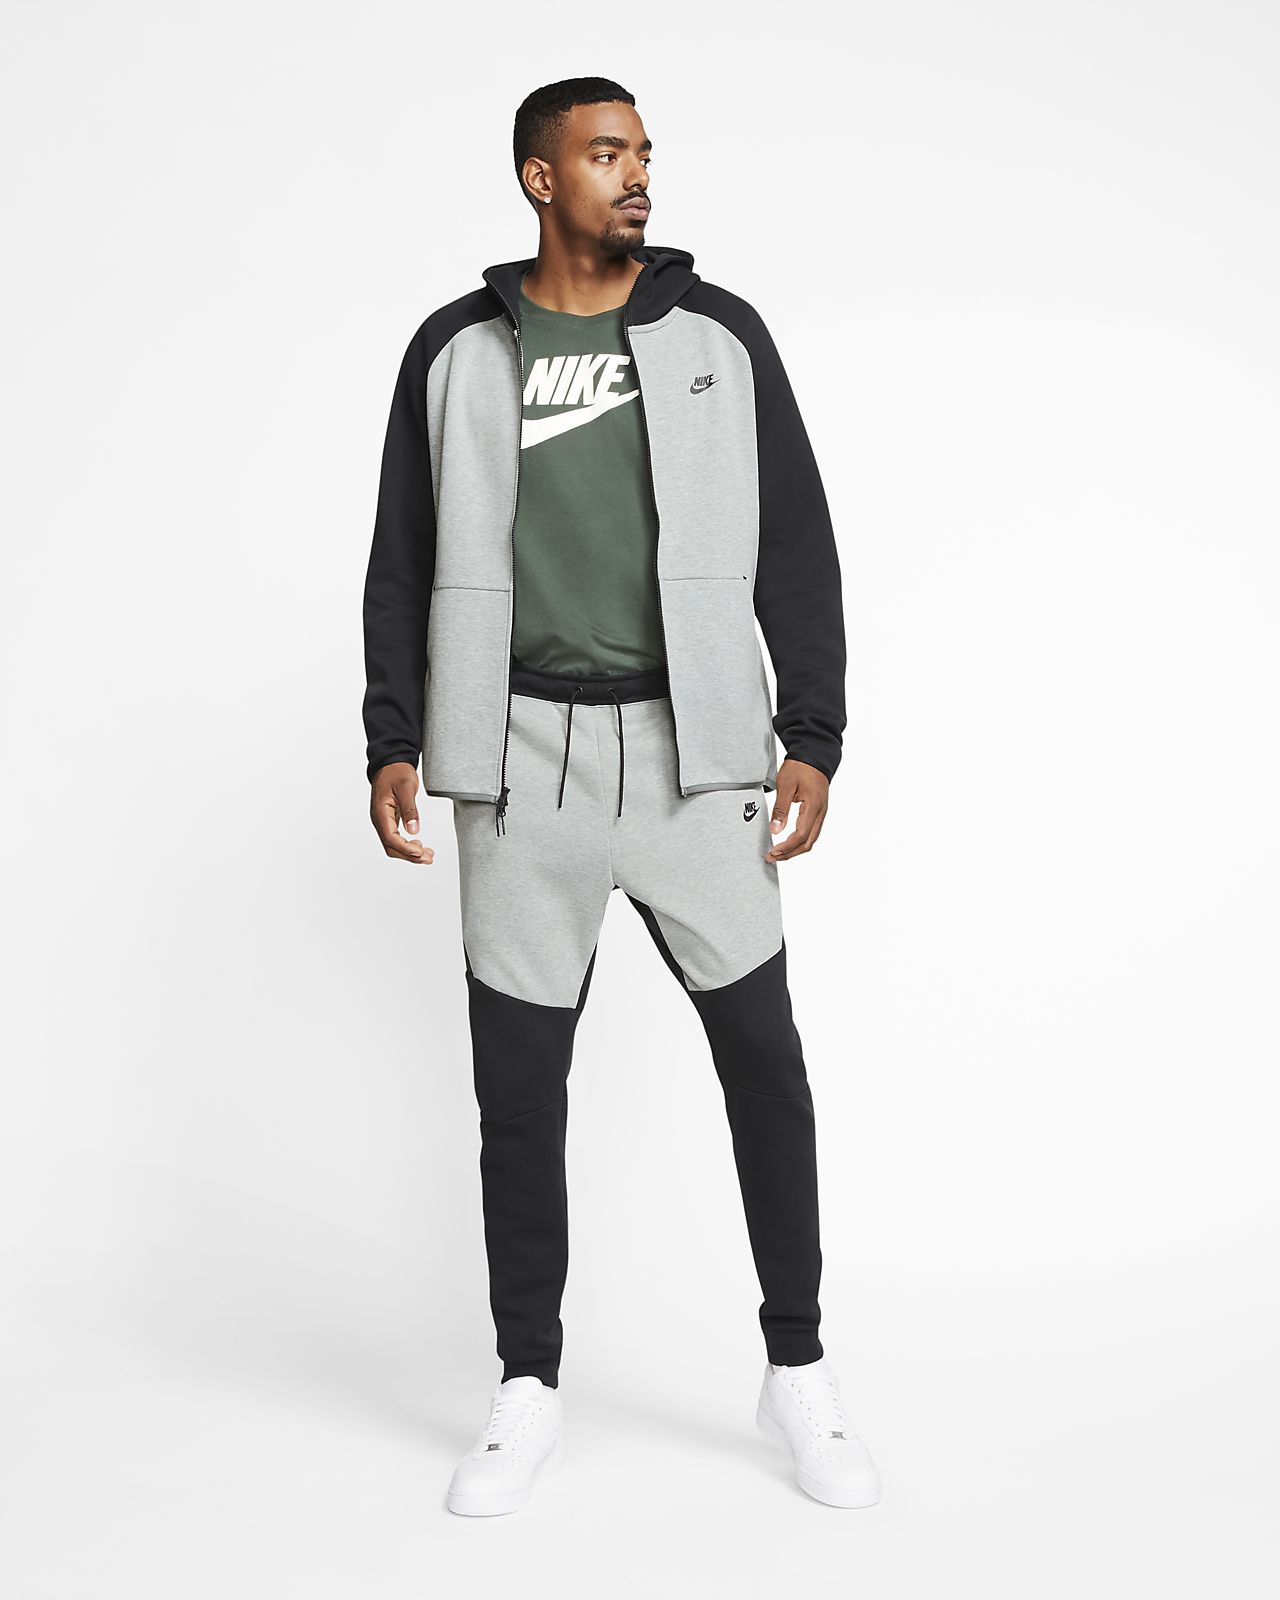 nike sweatsuit mens sale Sale,up to 63 